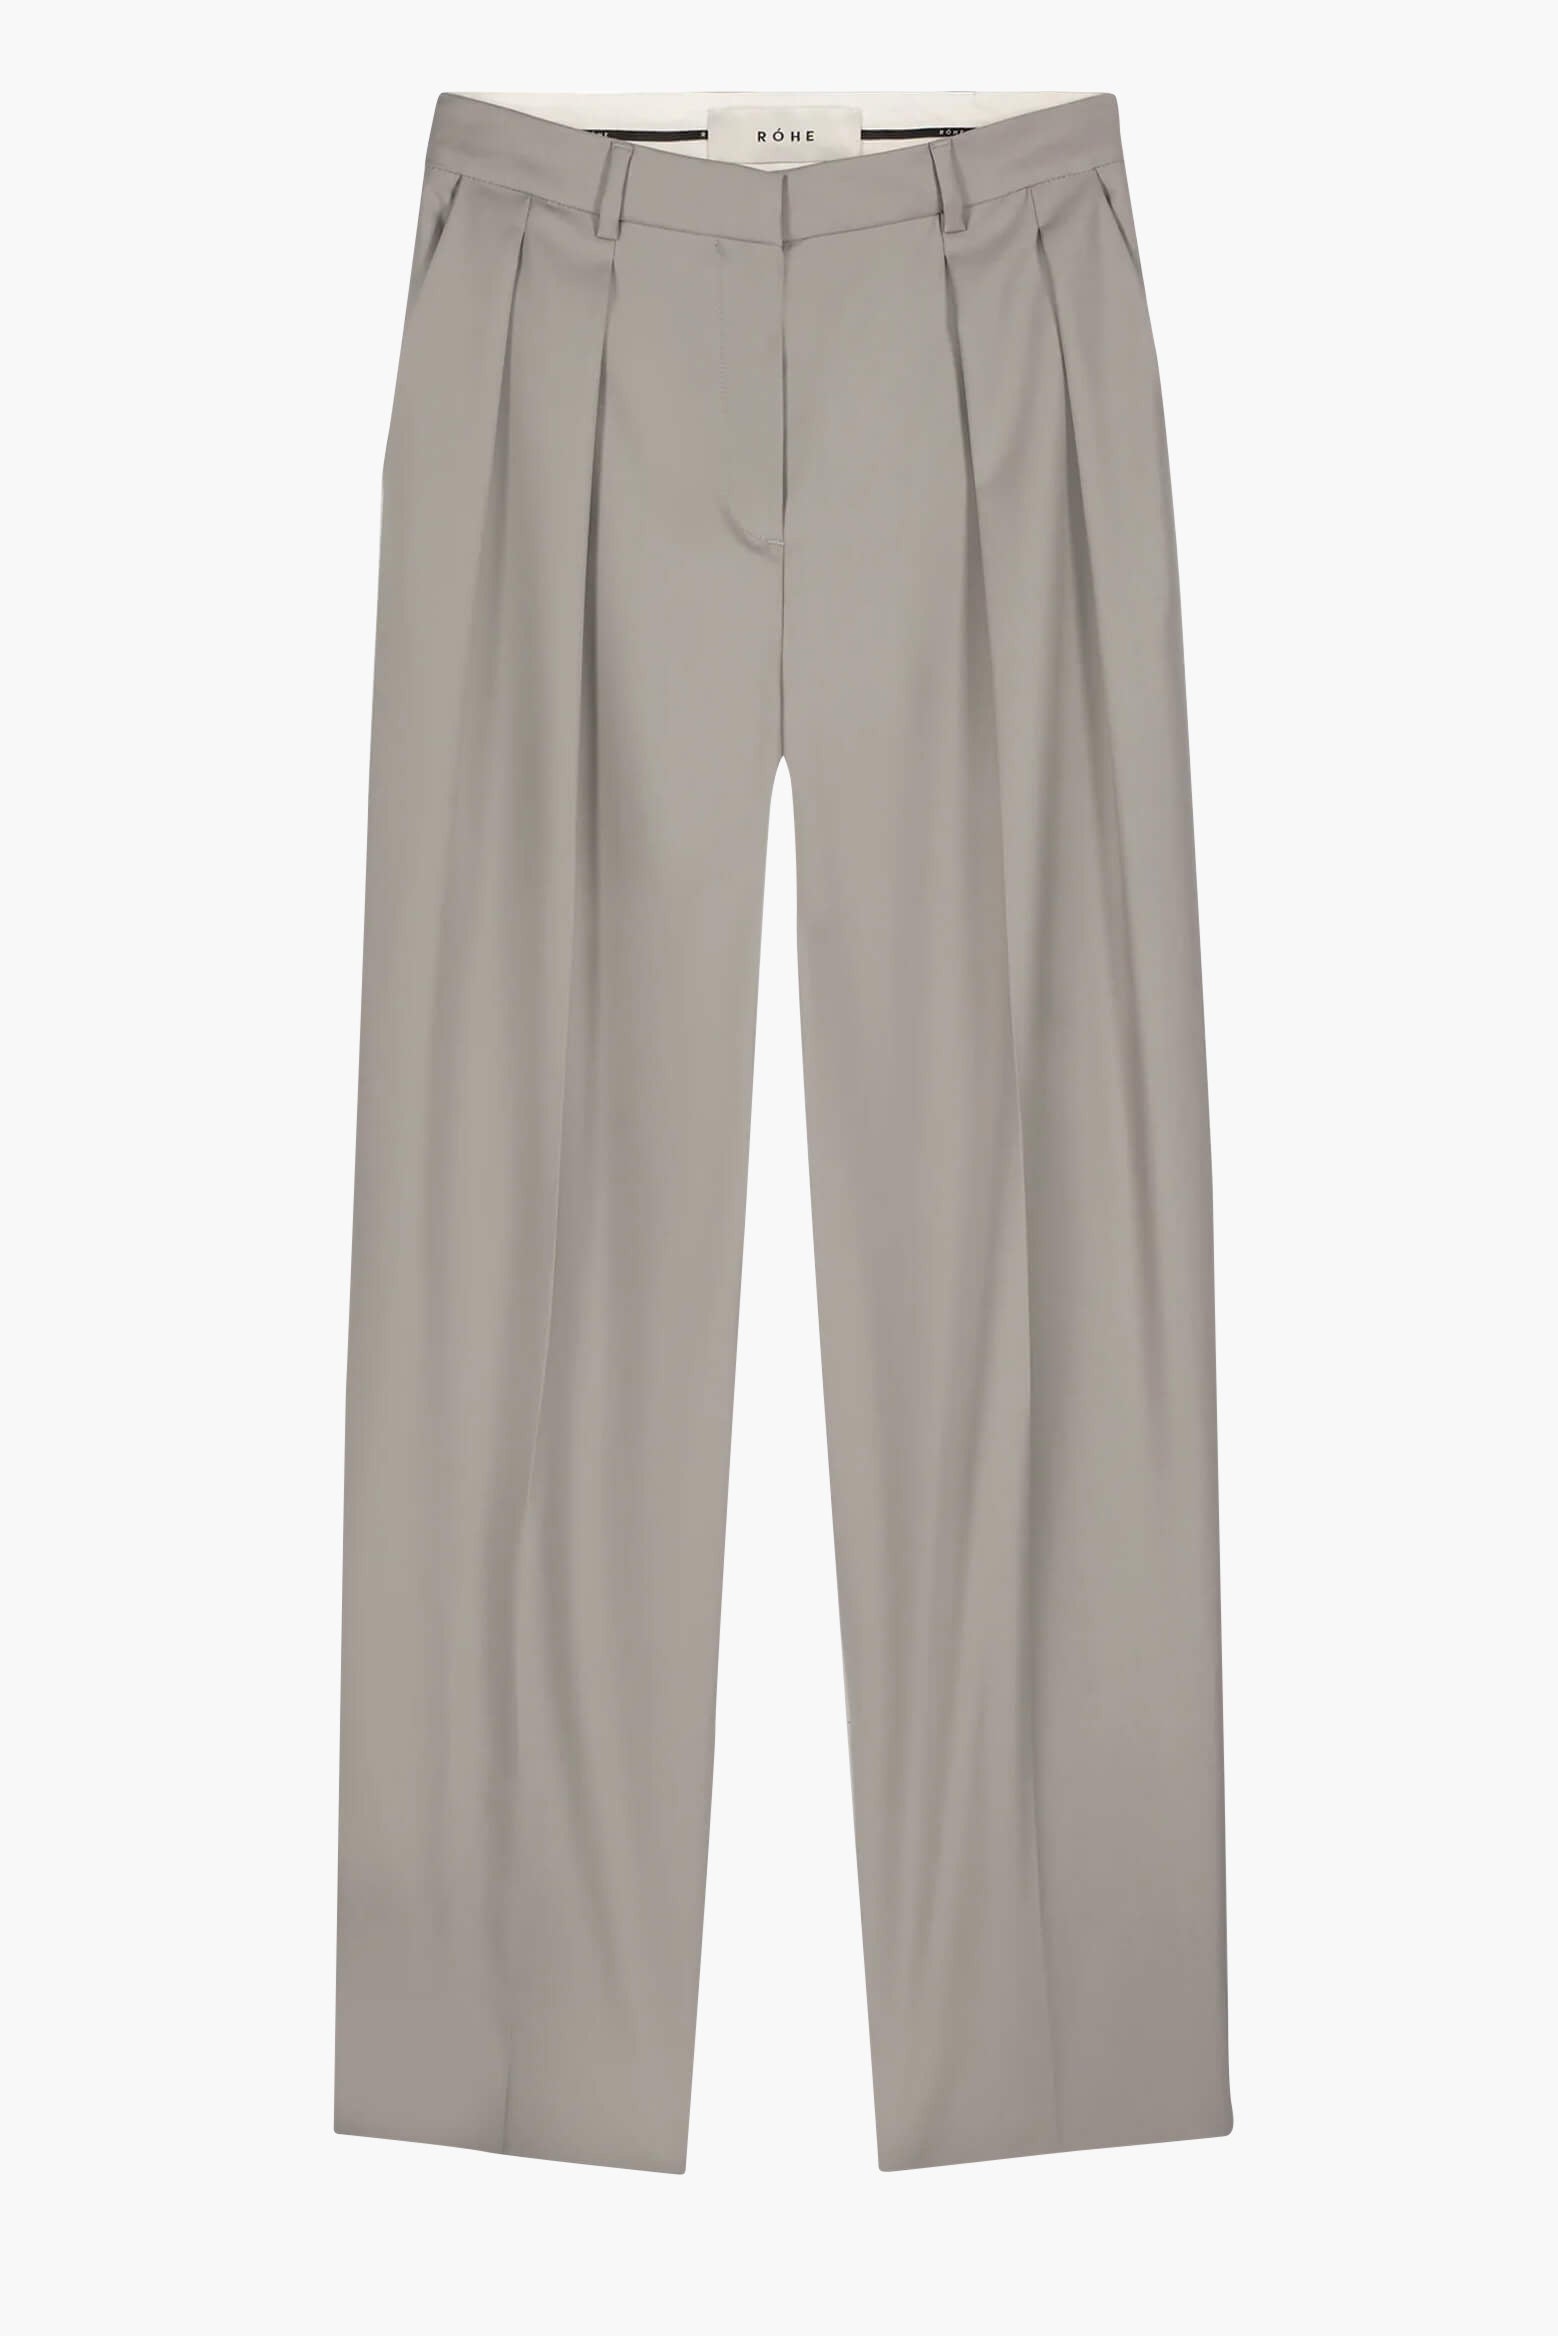 ROHE Pippa Trouser in Cold Grey from The New Trend